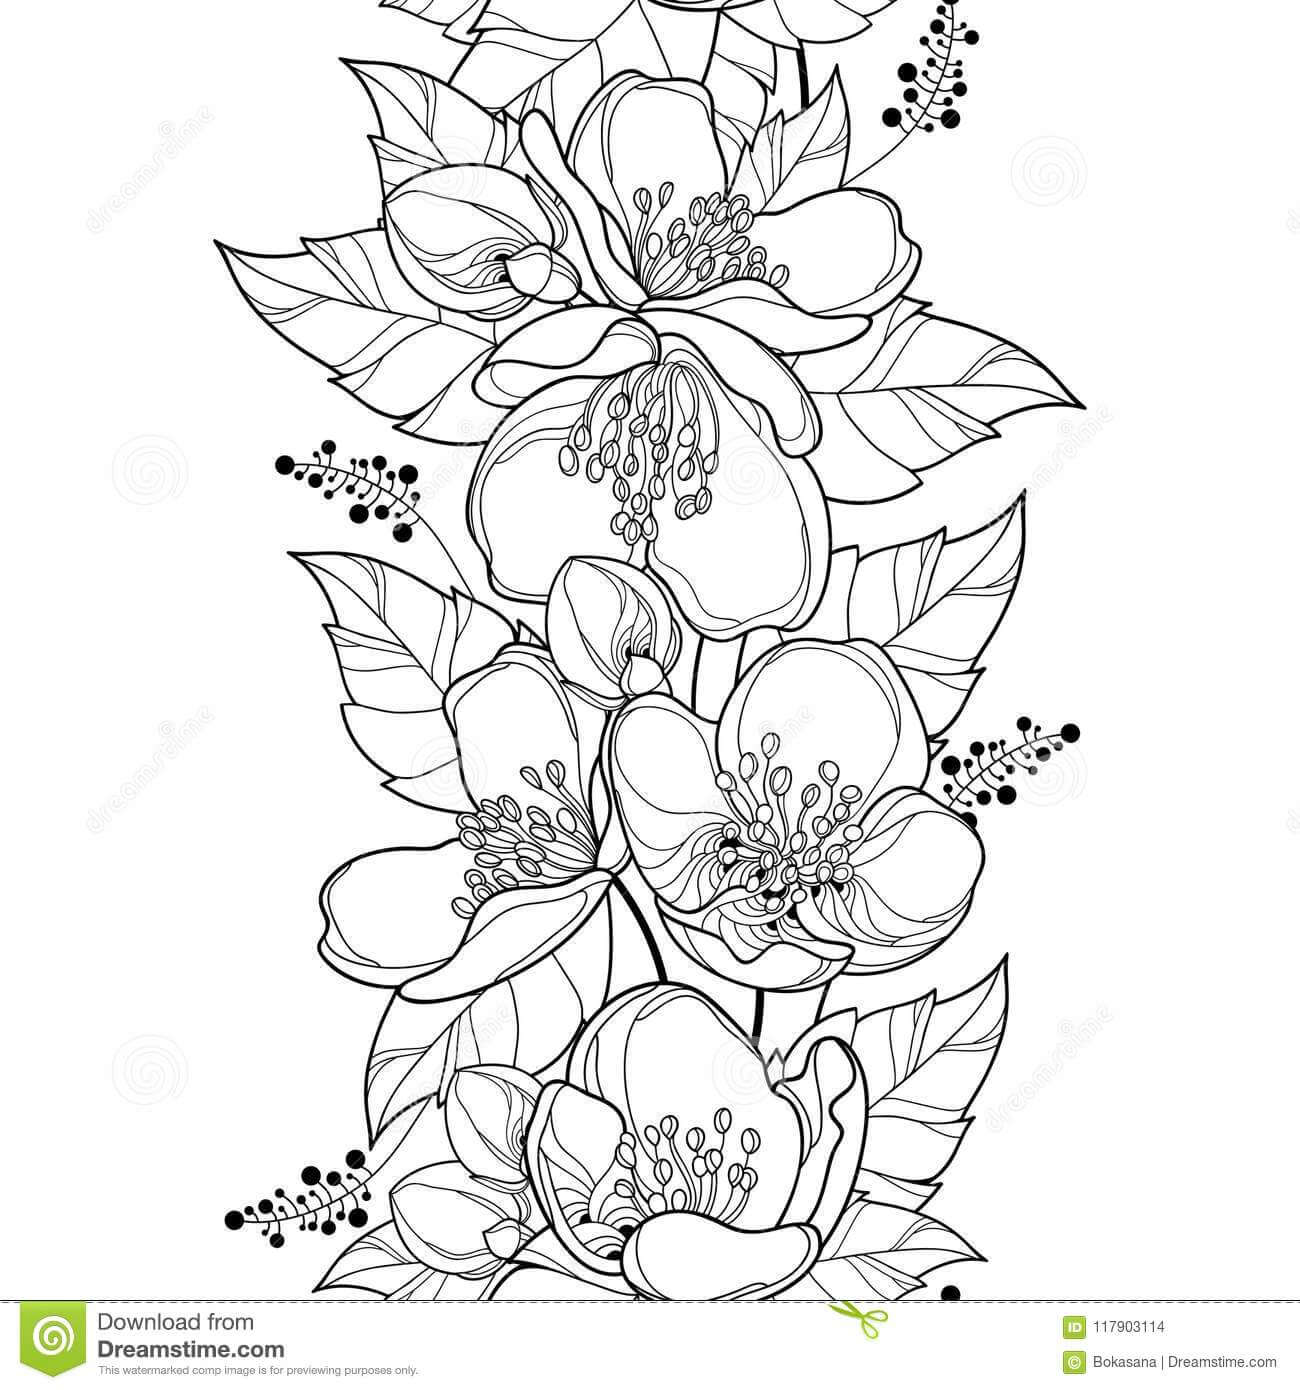 flower coloring pages for adults | beautiful flower coloring pages for kids & adults | simple flower coloring pages pdf